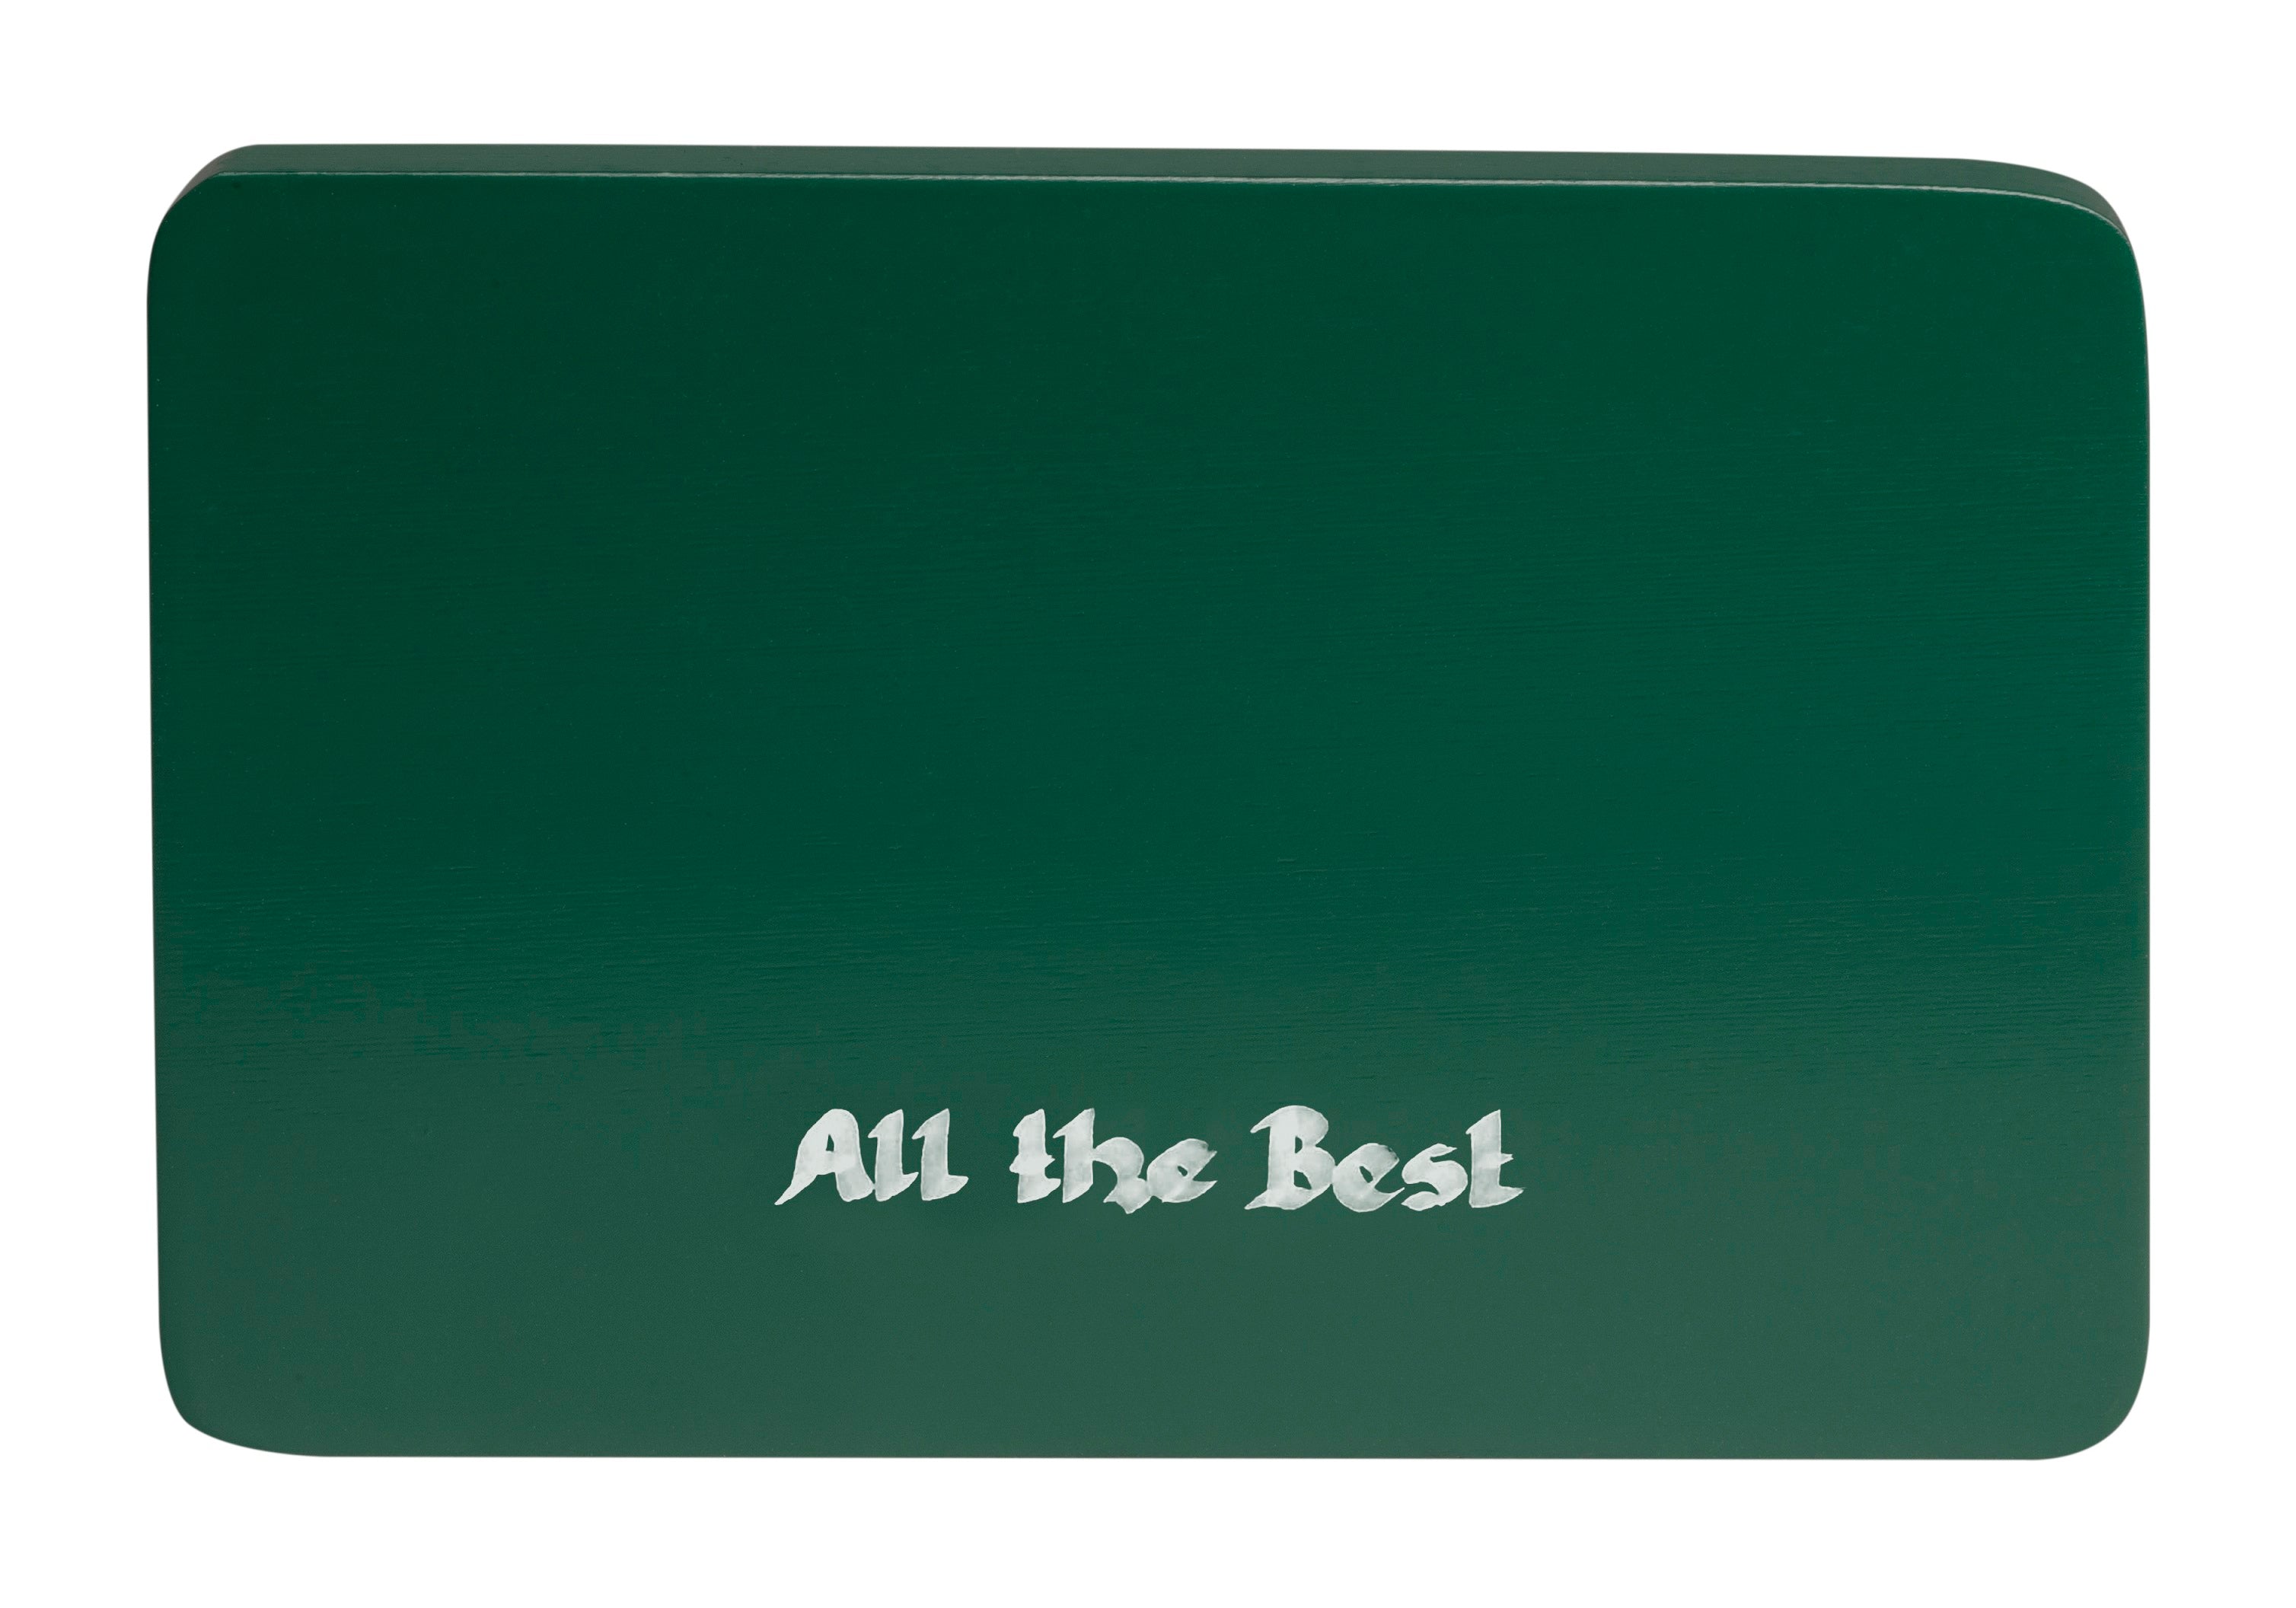 "All the Best" Base Plate